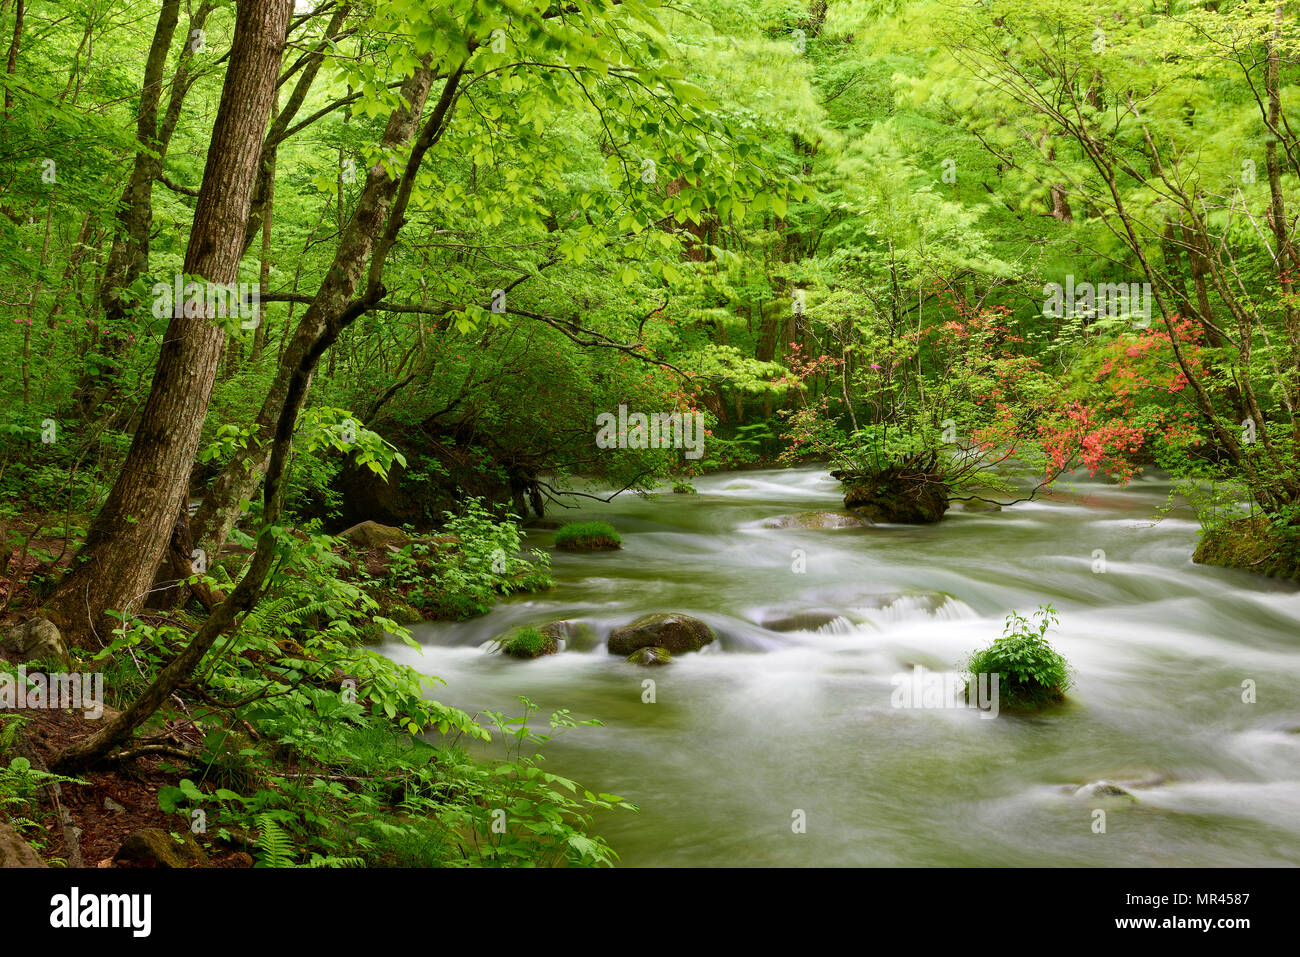 Oirase Keiryu Stream In Towada National Park Japan The Stream Walk Is 14km Long And Features A Series Of Currents And Waterfalls Stock Photo Alamy